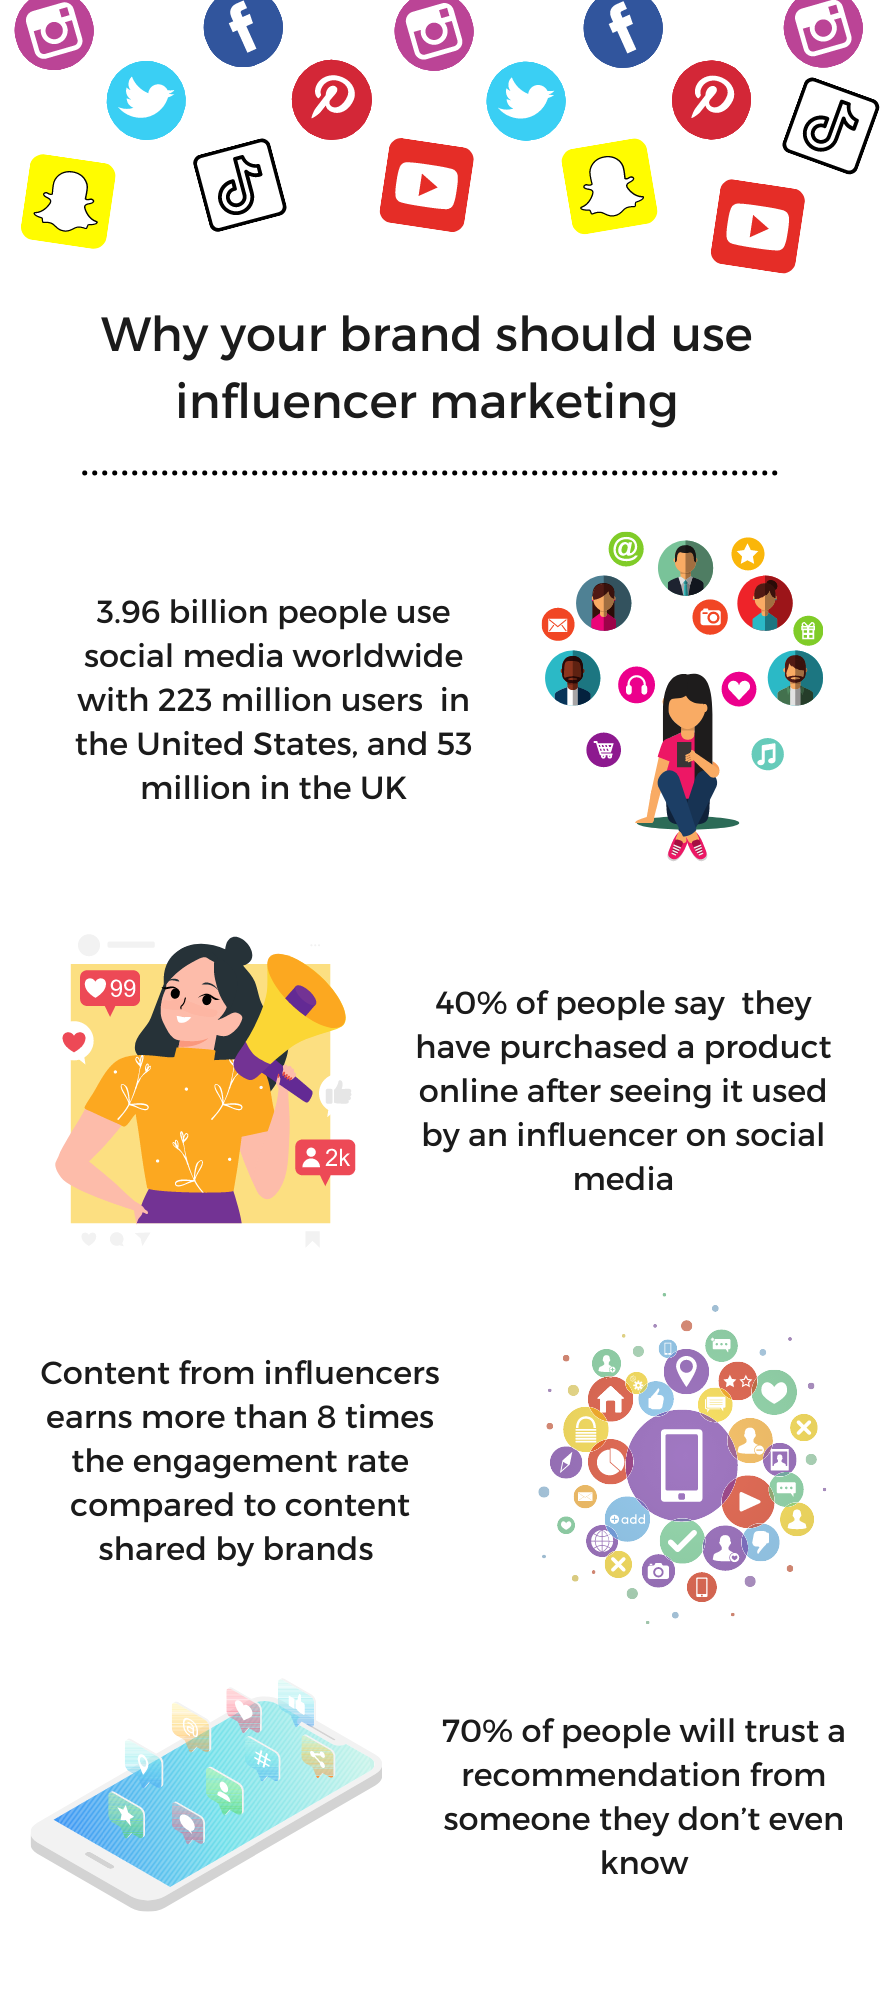 Why your brand should use influencer marketing